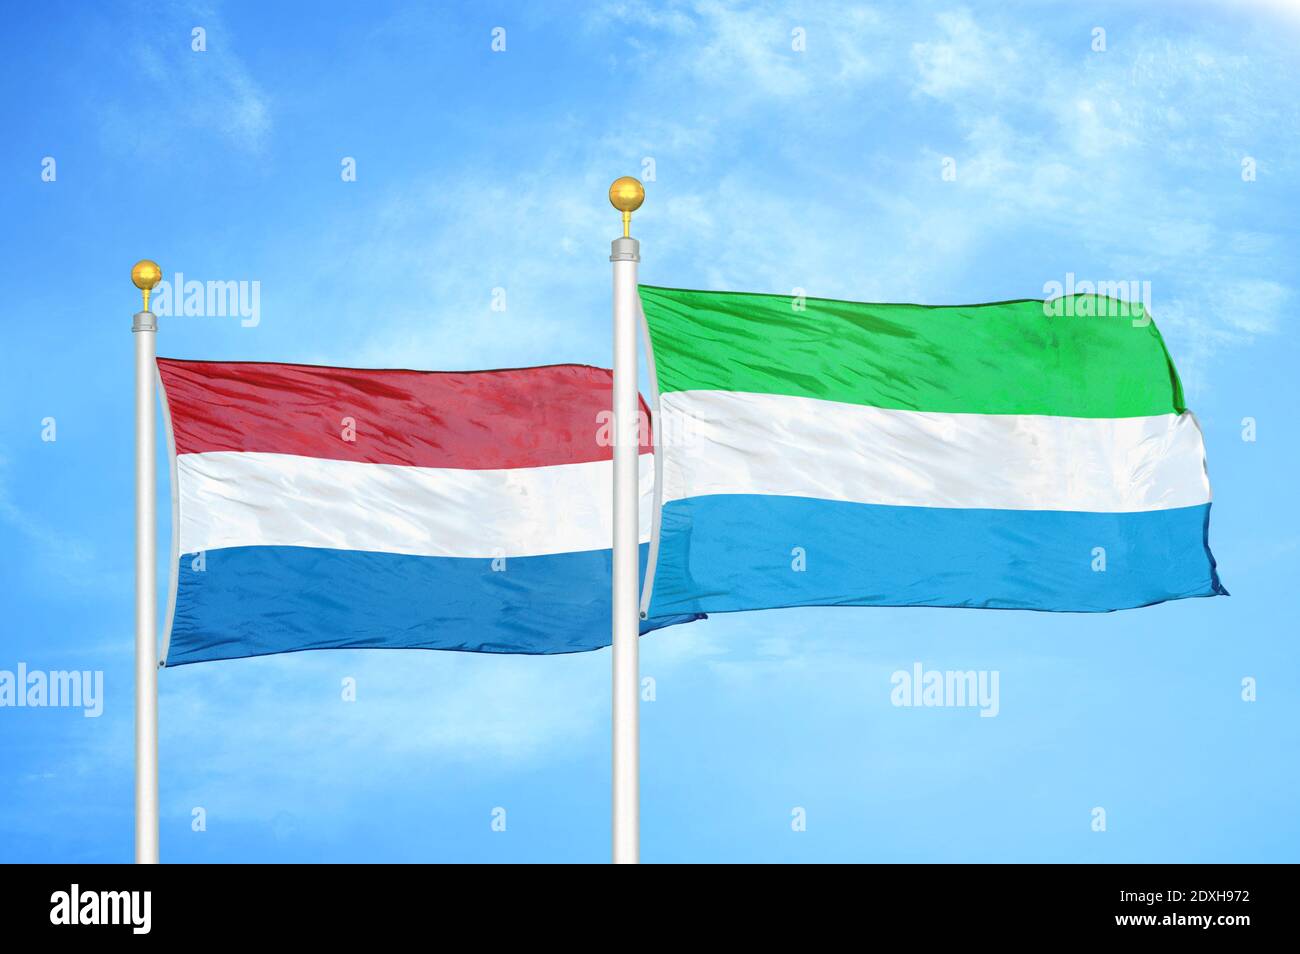 Netherlands and Sierra Leone two flags on flagpoles and blue sky Stock Photo